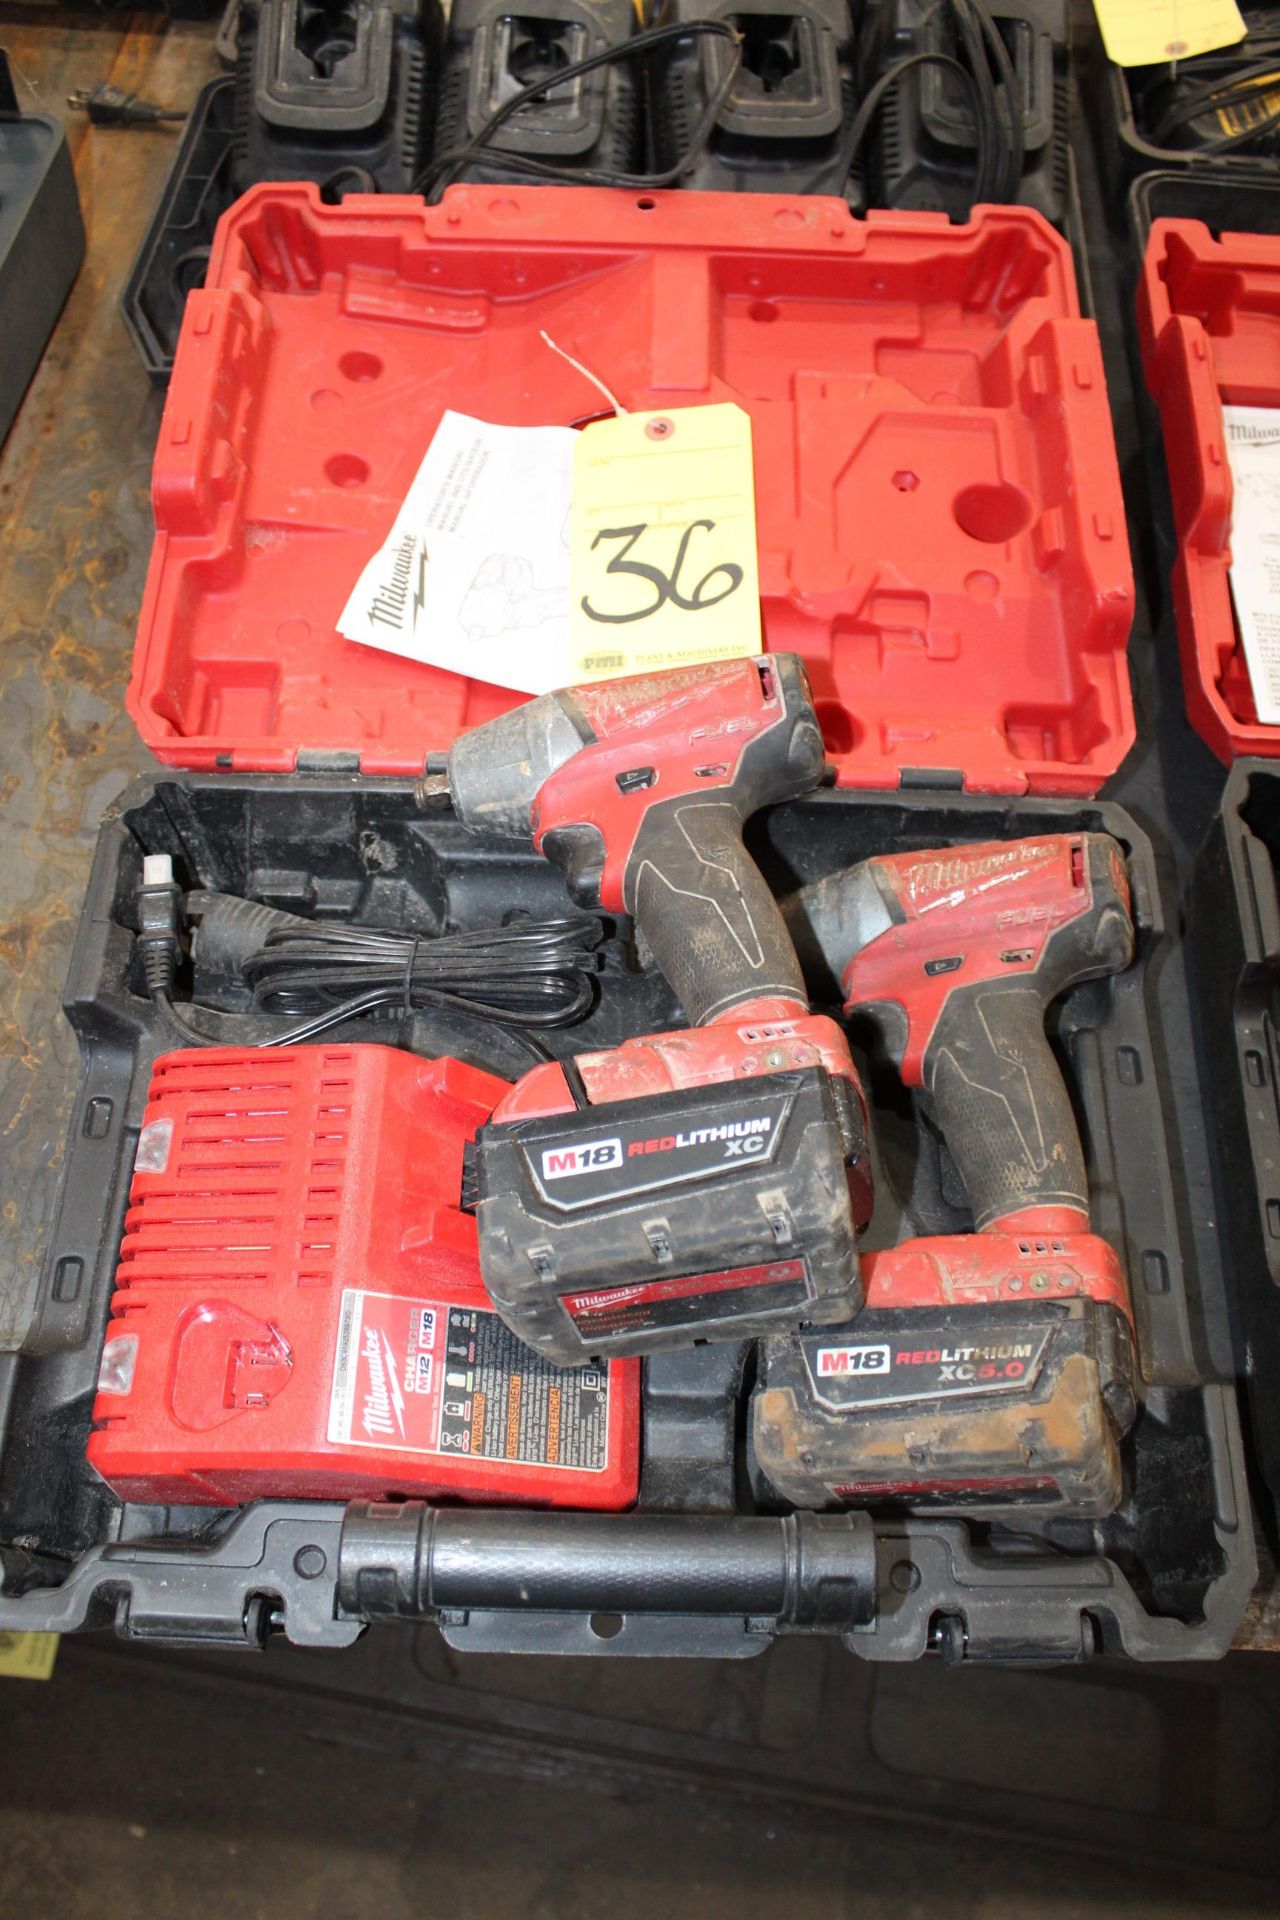 CORDLESS IMPACT DRIVER, MILWAUKEE M18, battery pwrd., red lithium XC 5.0, w/charger & (2) batteries